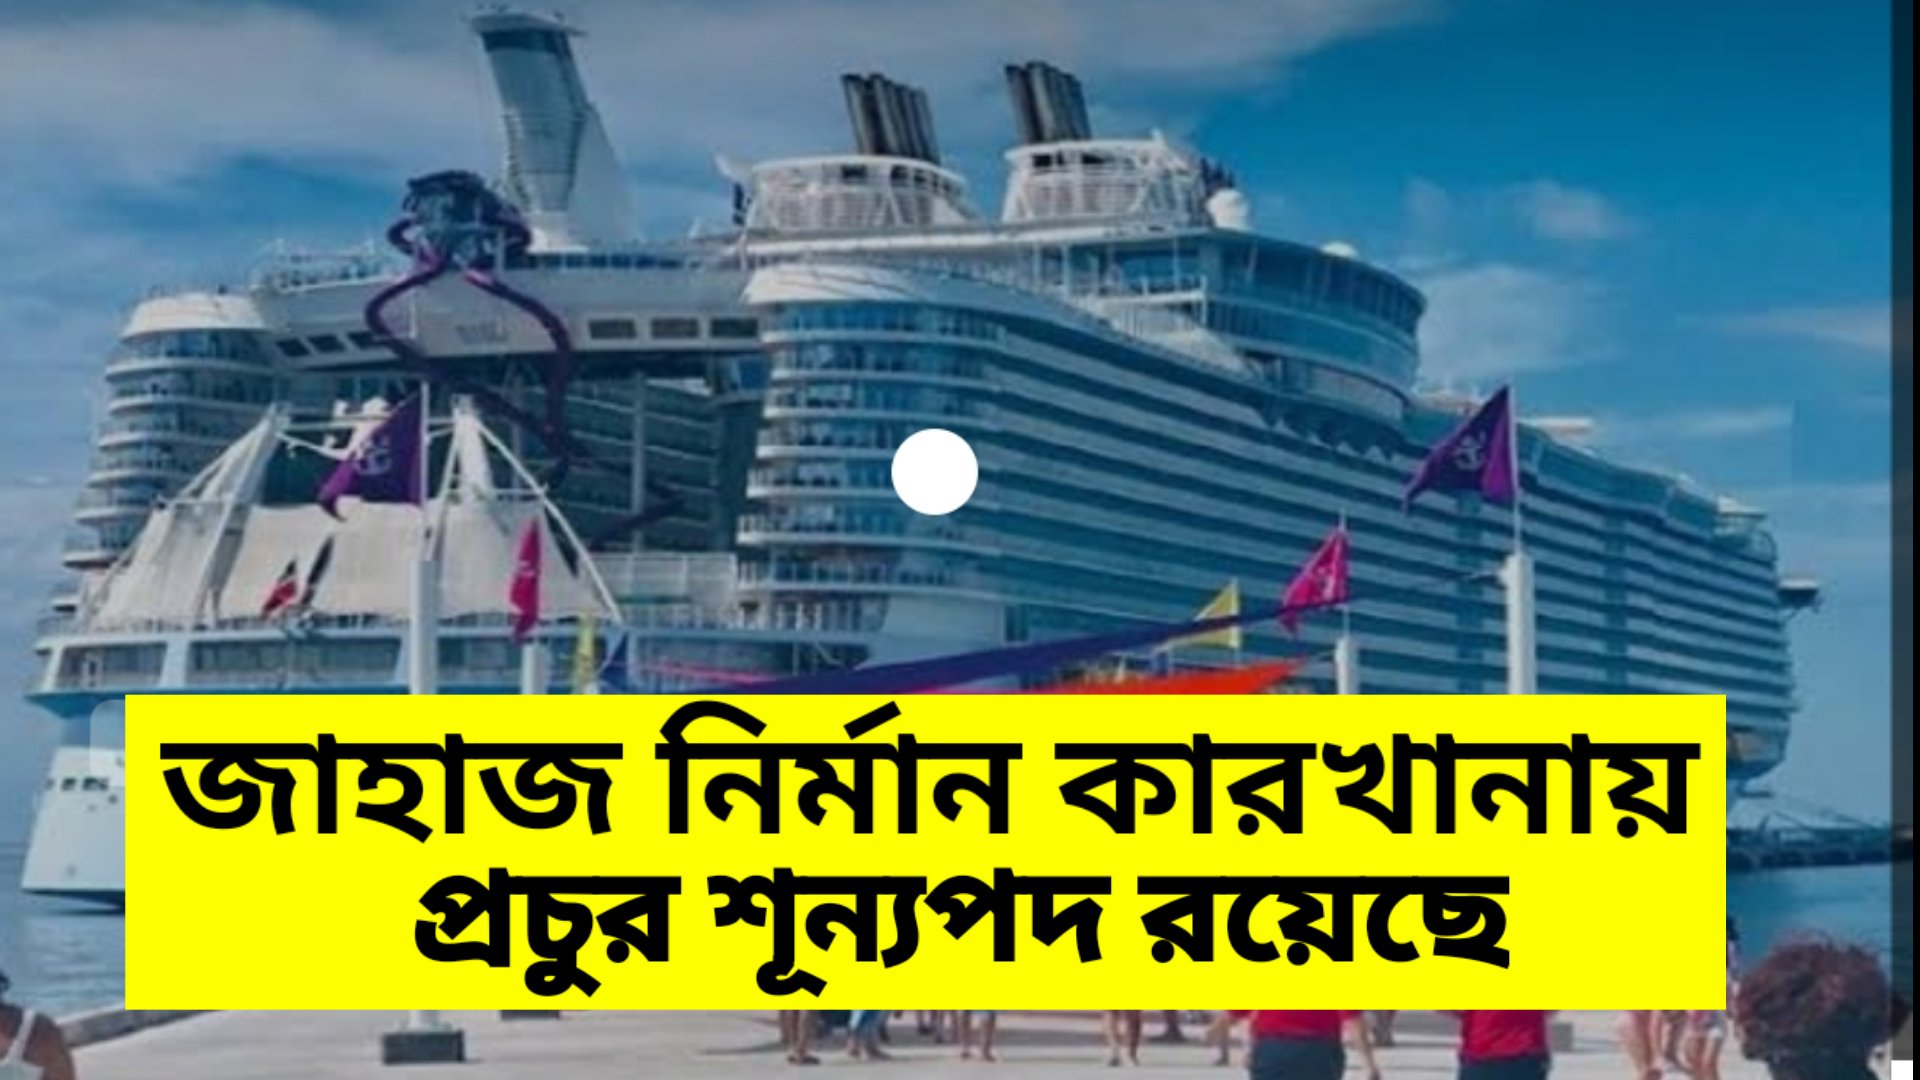 Recruitment of workers for various posts in shipbuilding factories